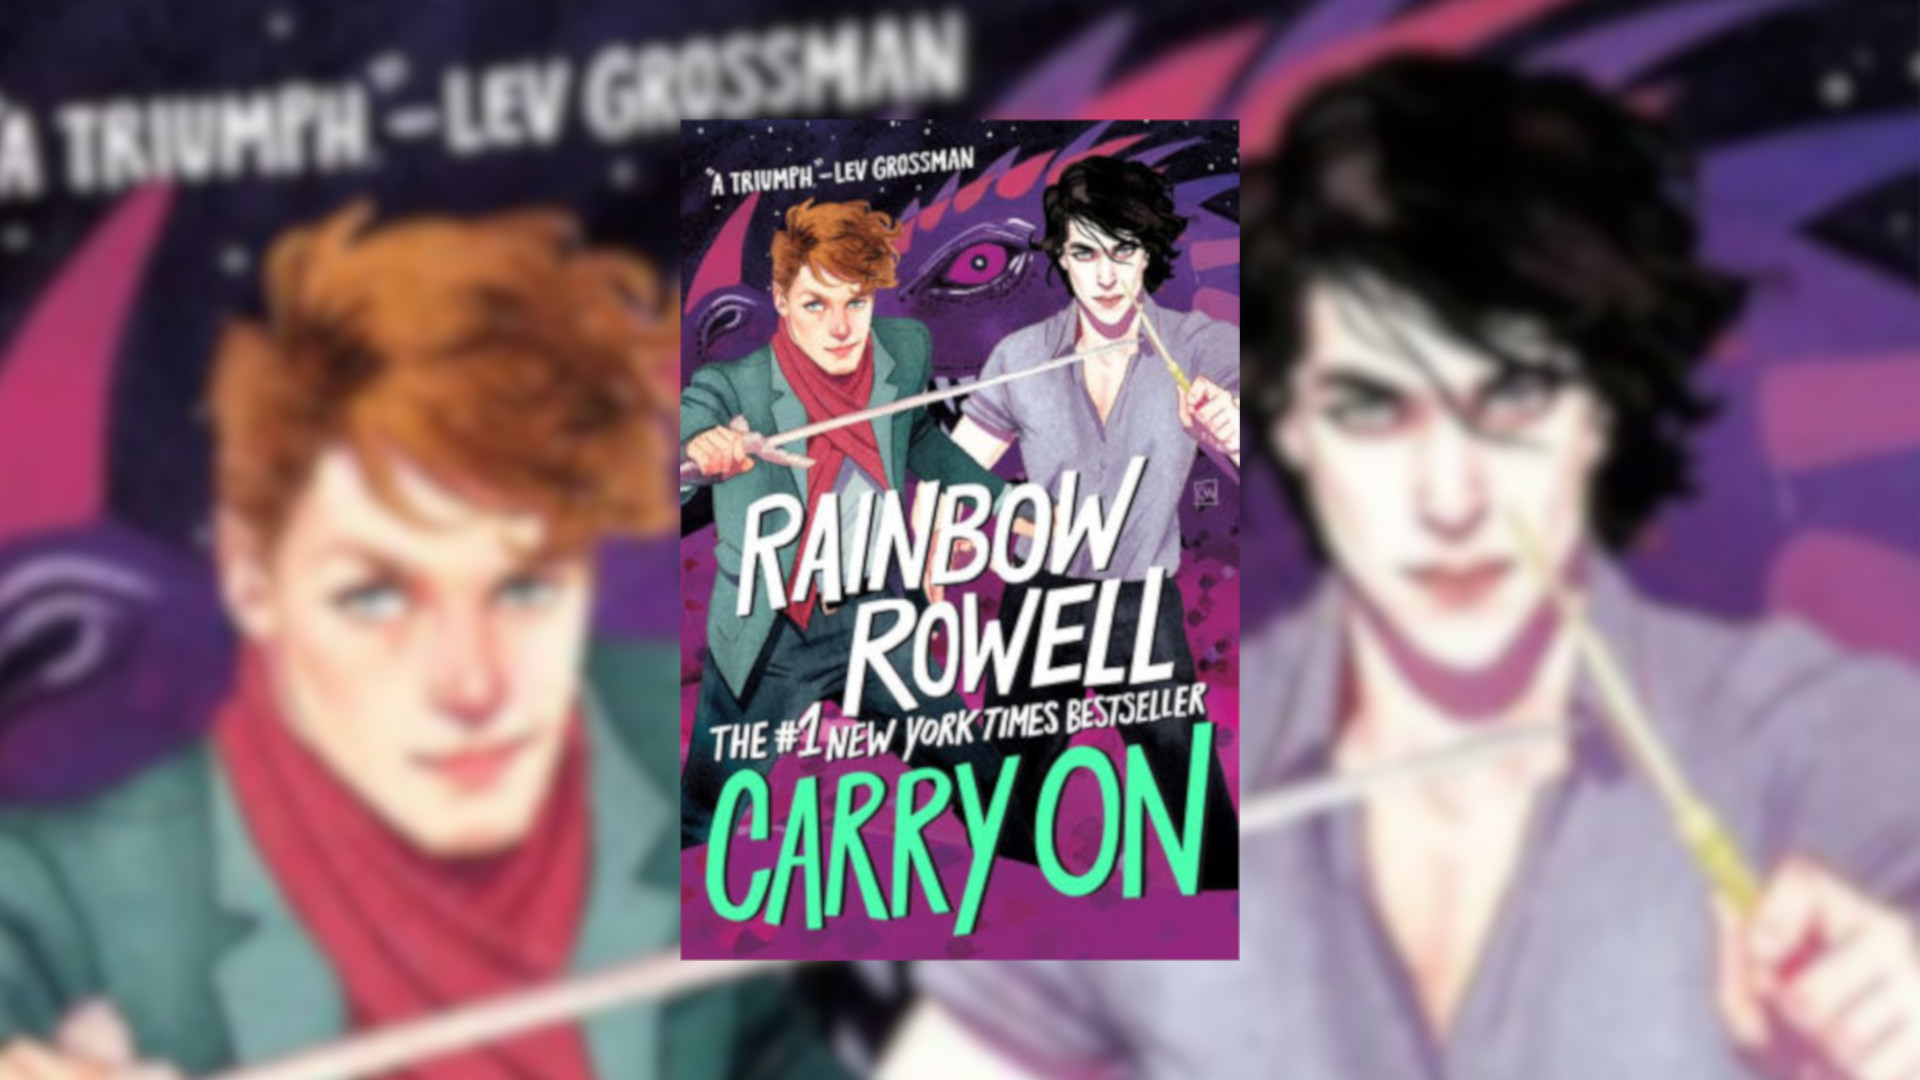 Carry On: A wizarding world with gay representation